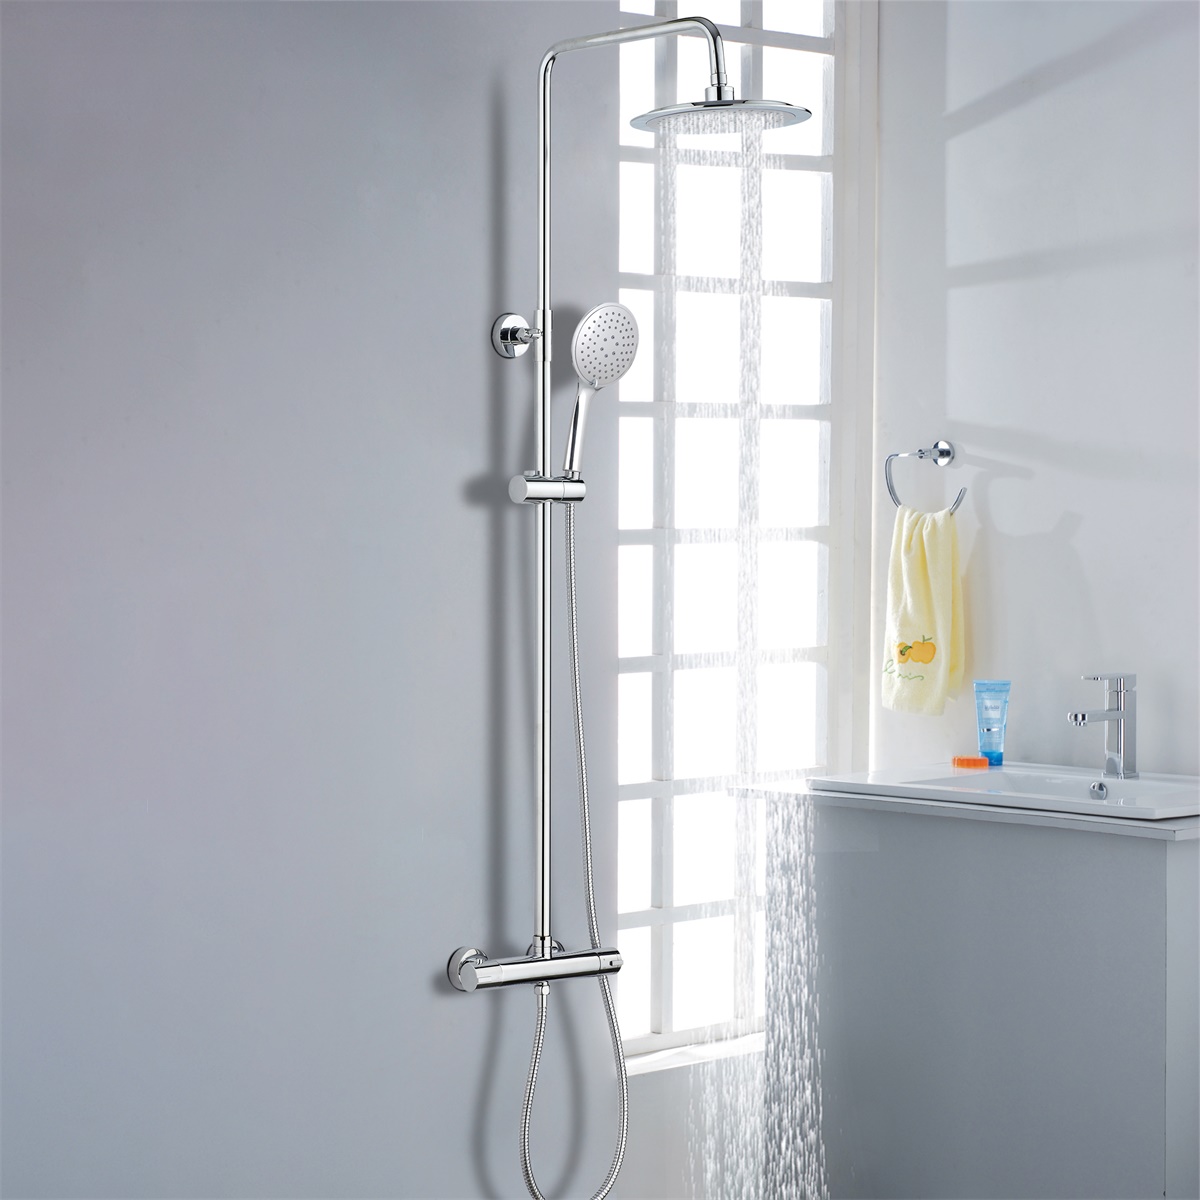 YS34131C	Shower column, rain shower column with thermostatic faucet, height adjustable;